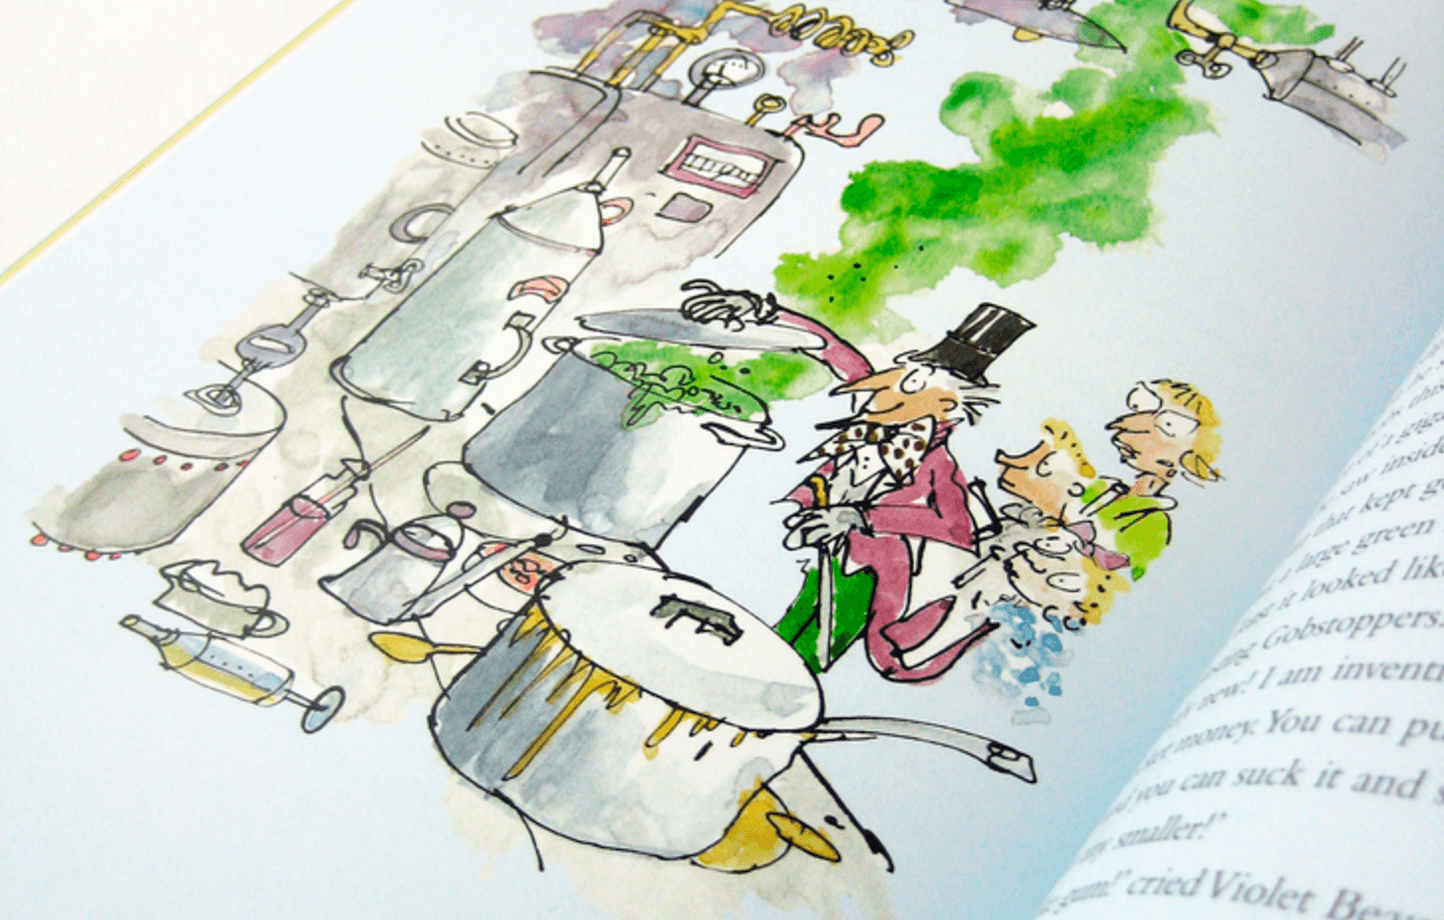 'Charlie and the Chocolate Factory' by Roald Dahl, featuring illustrations from Quentin Blake 